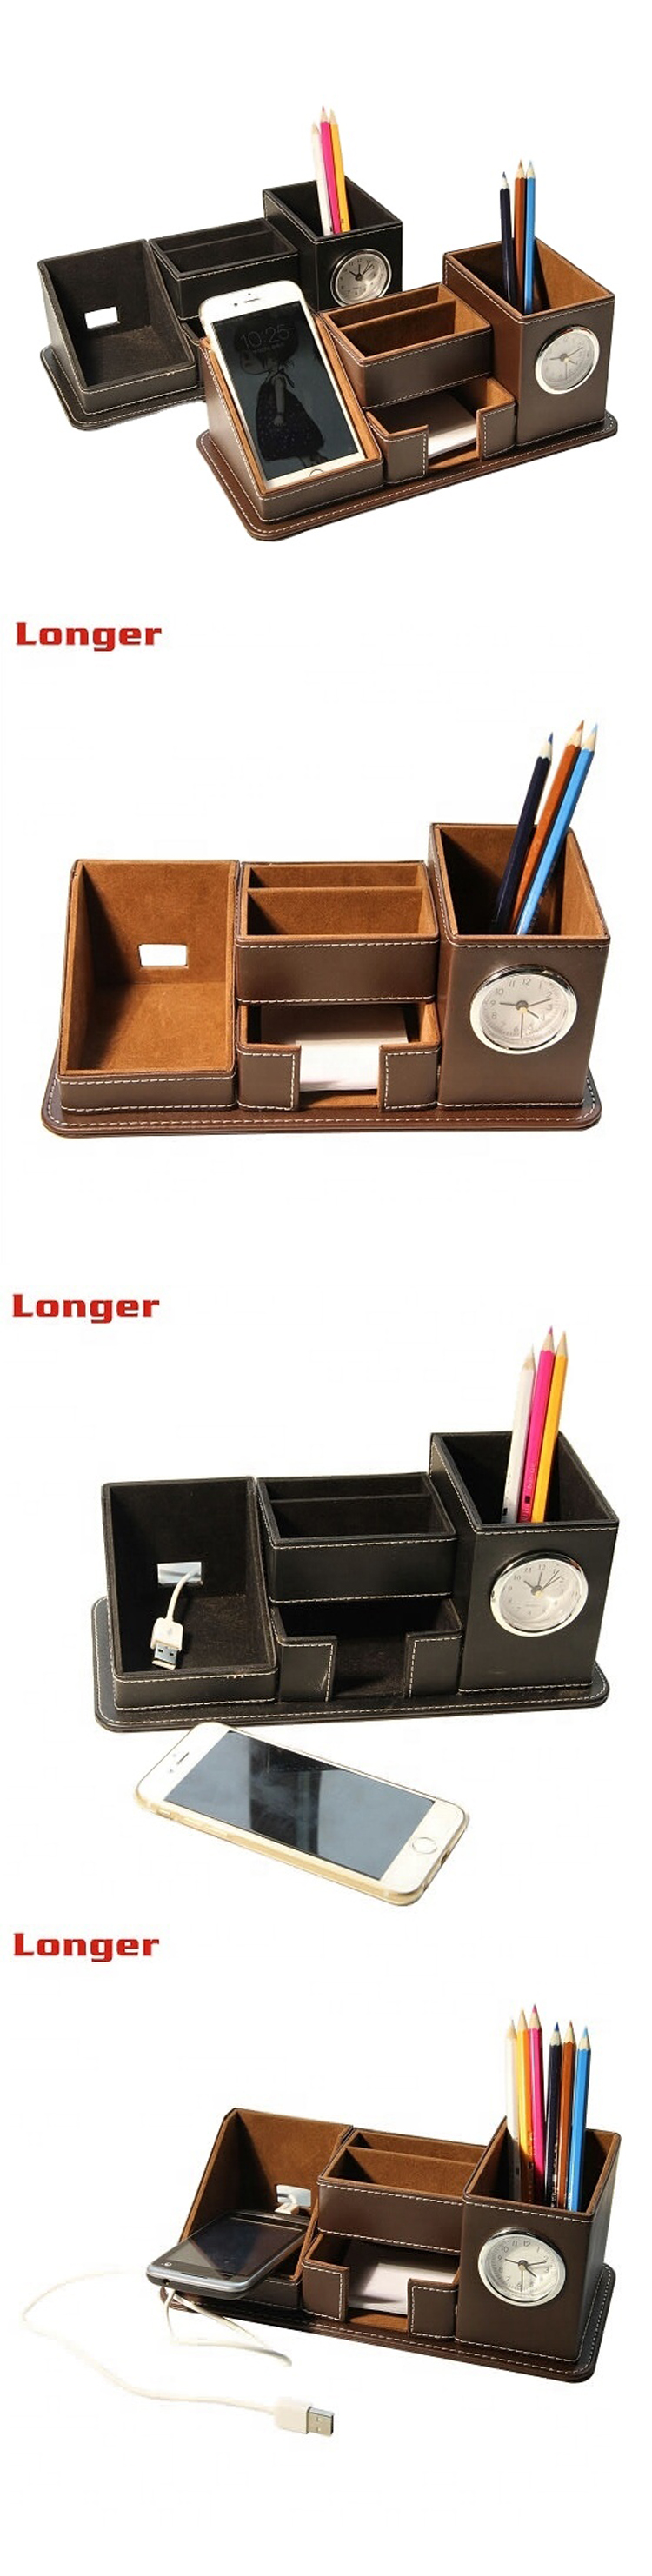 Multi-functional Handmade PU Leather Office Gift Desk Organizer With Clock 